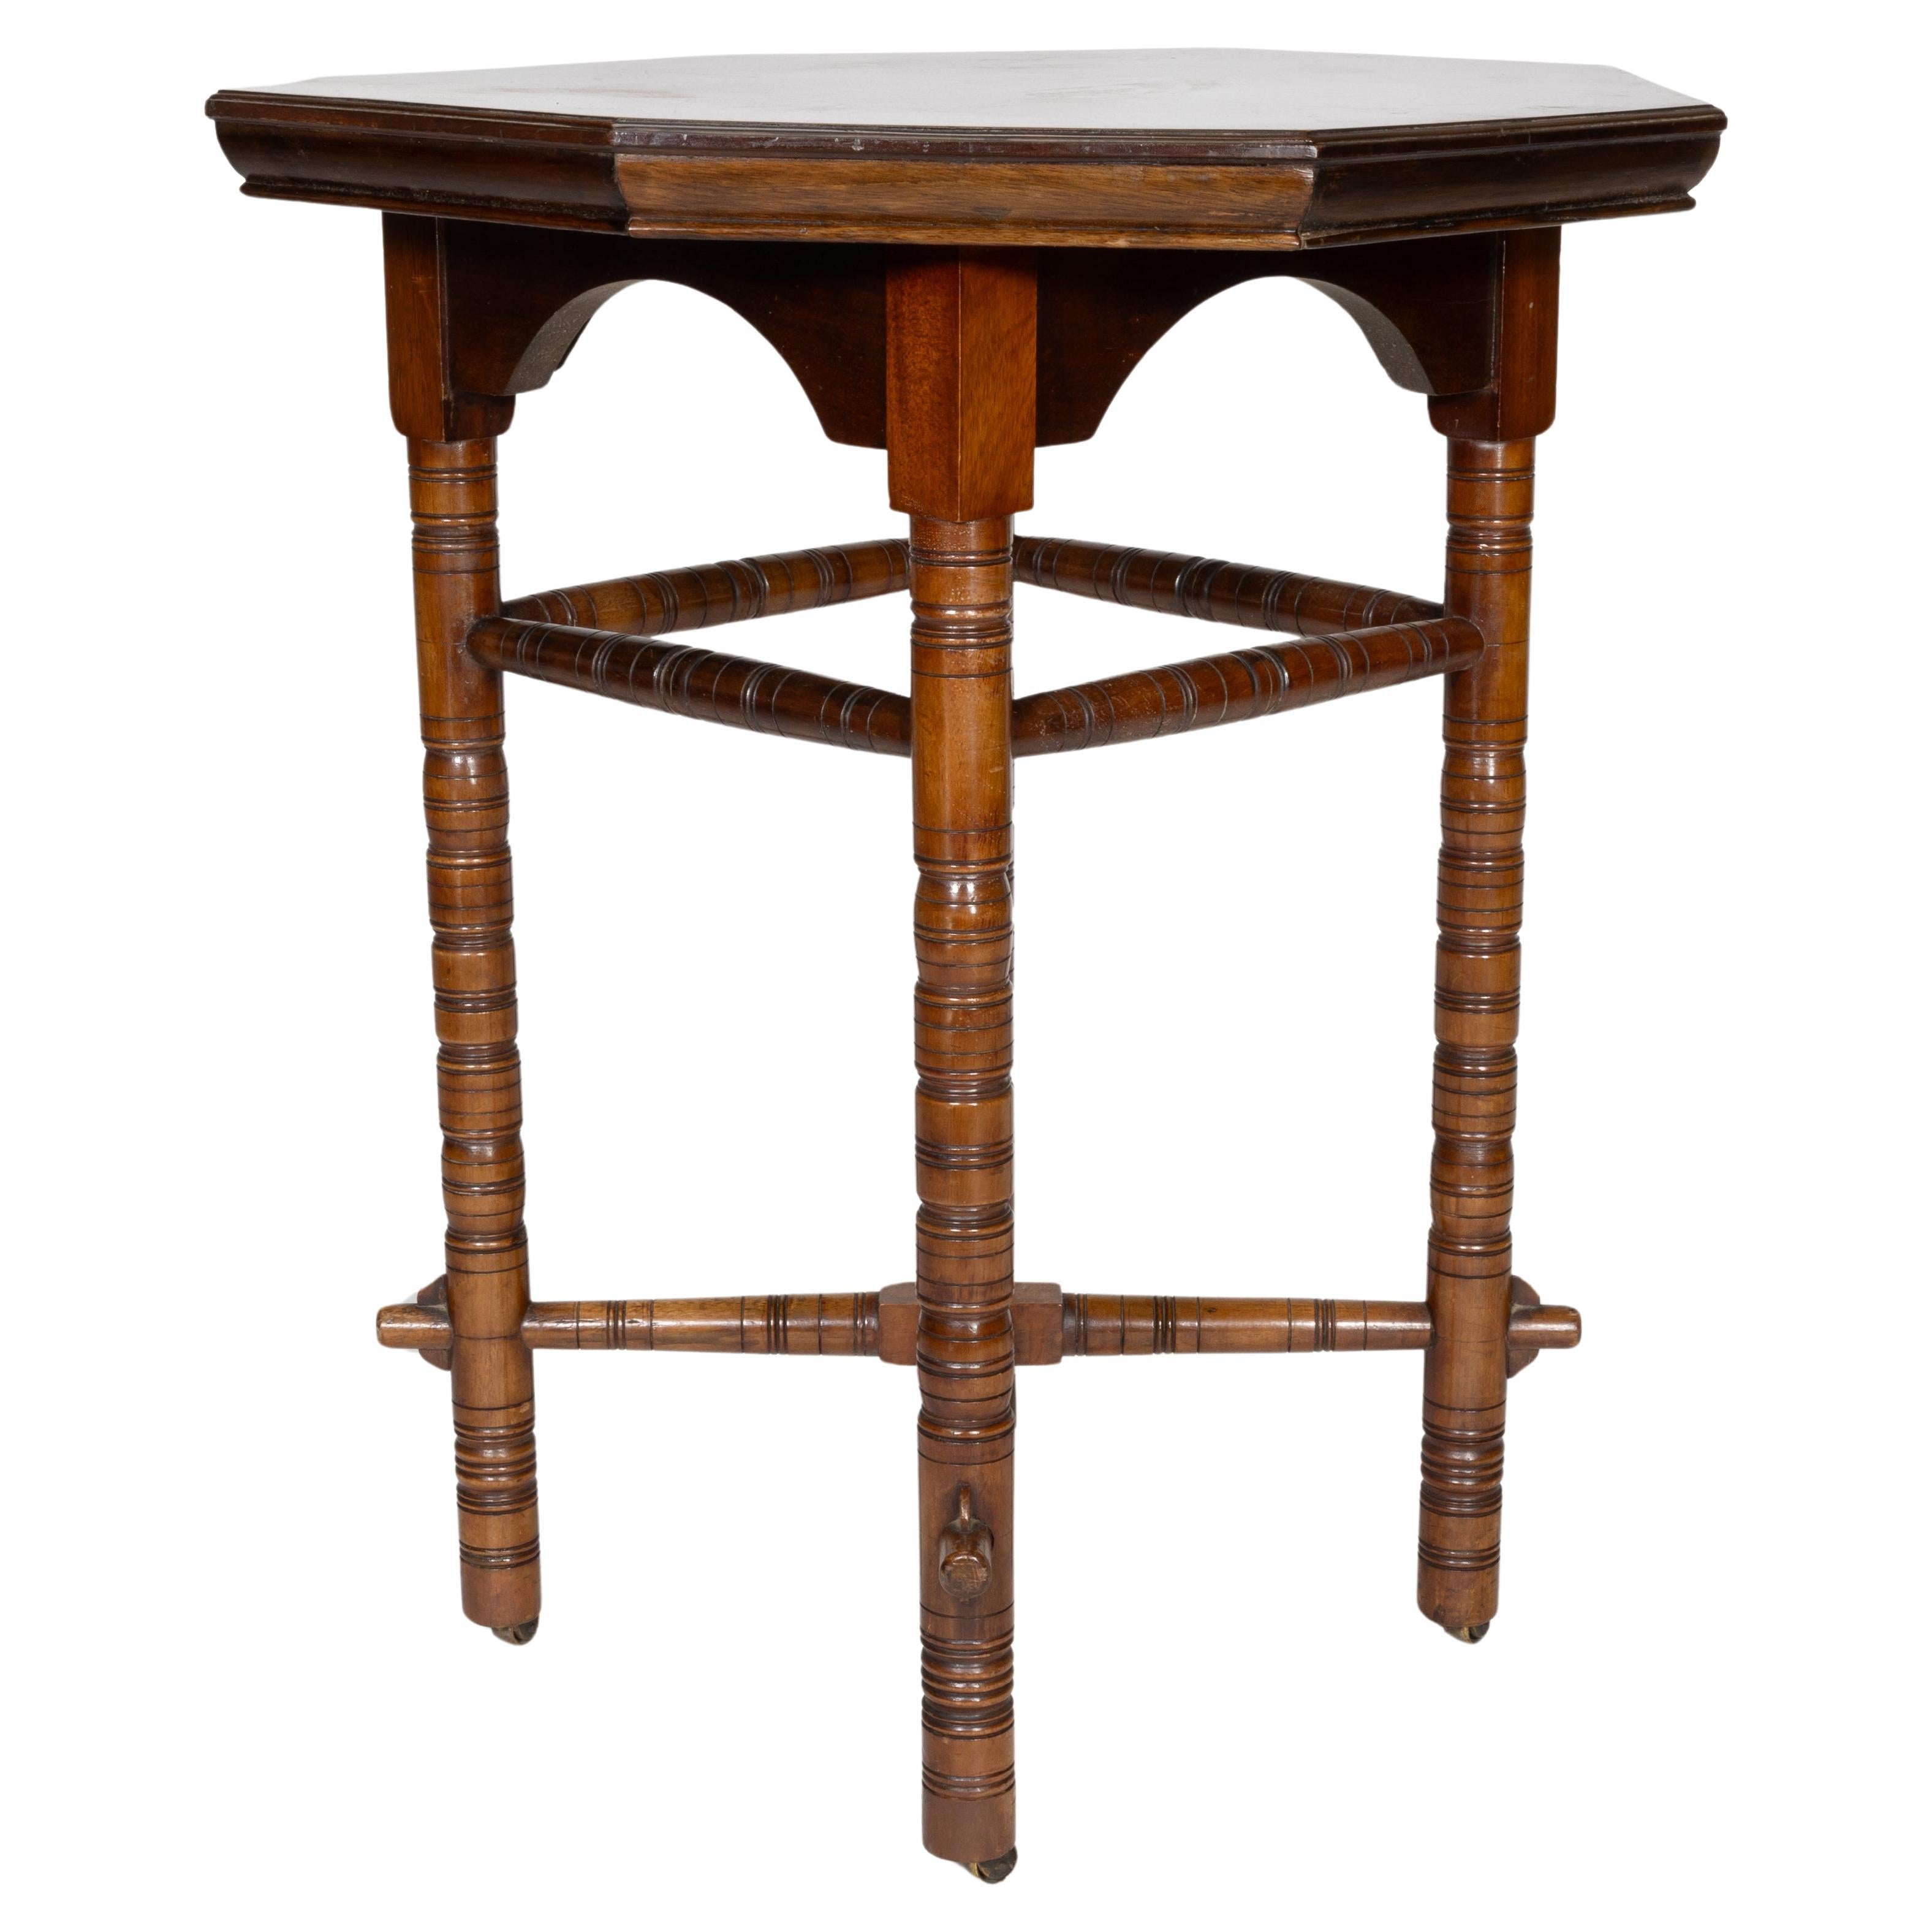 E W Godwin (style of). An Aesthetic Movement walnut octagonal table For Sale